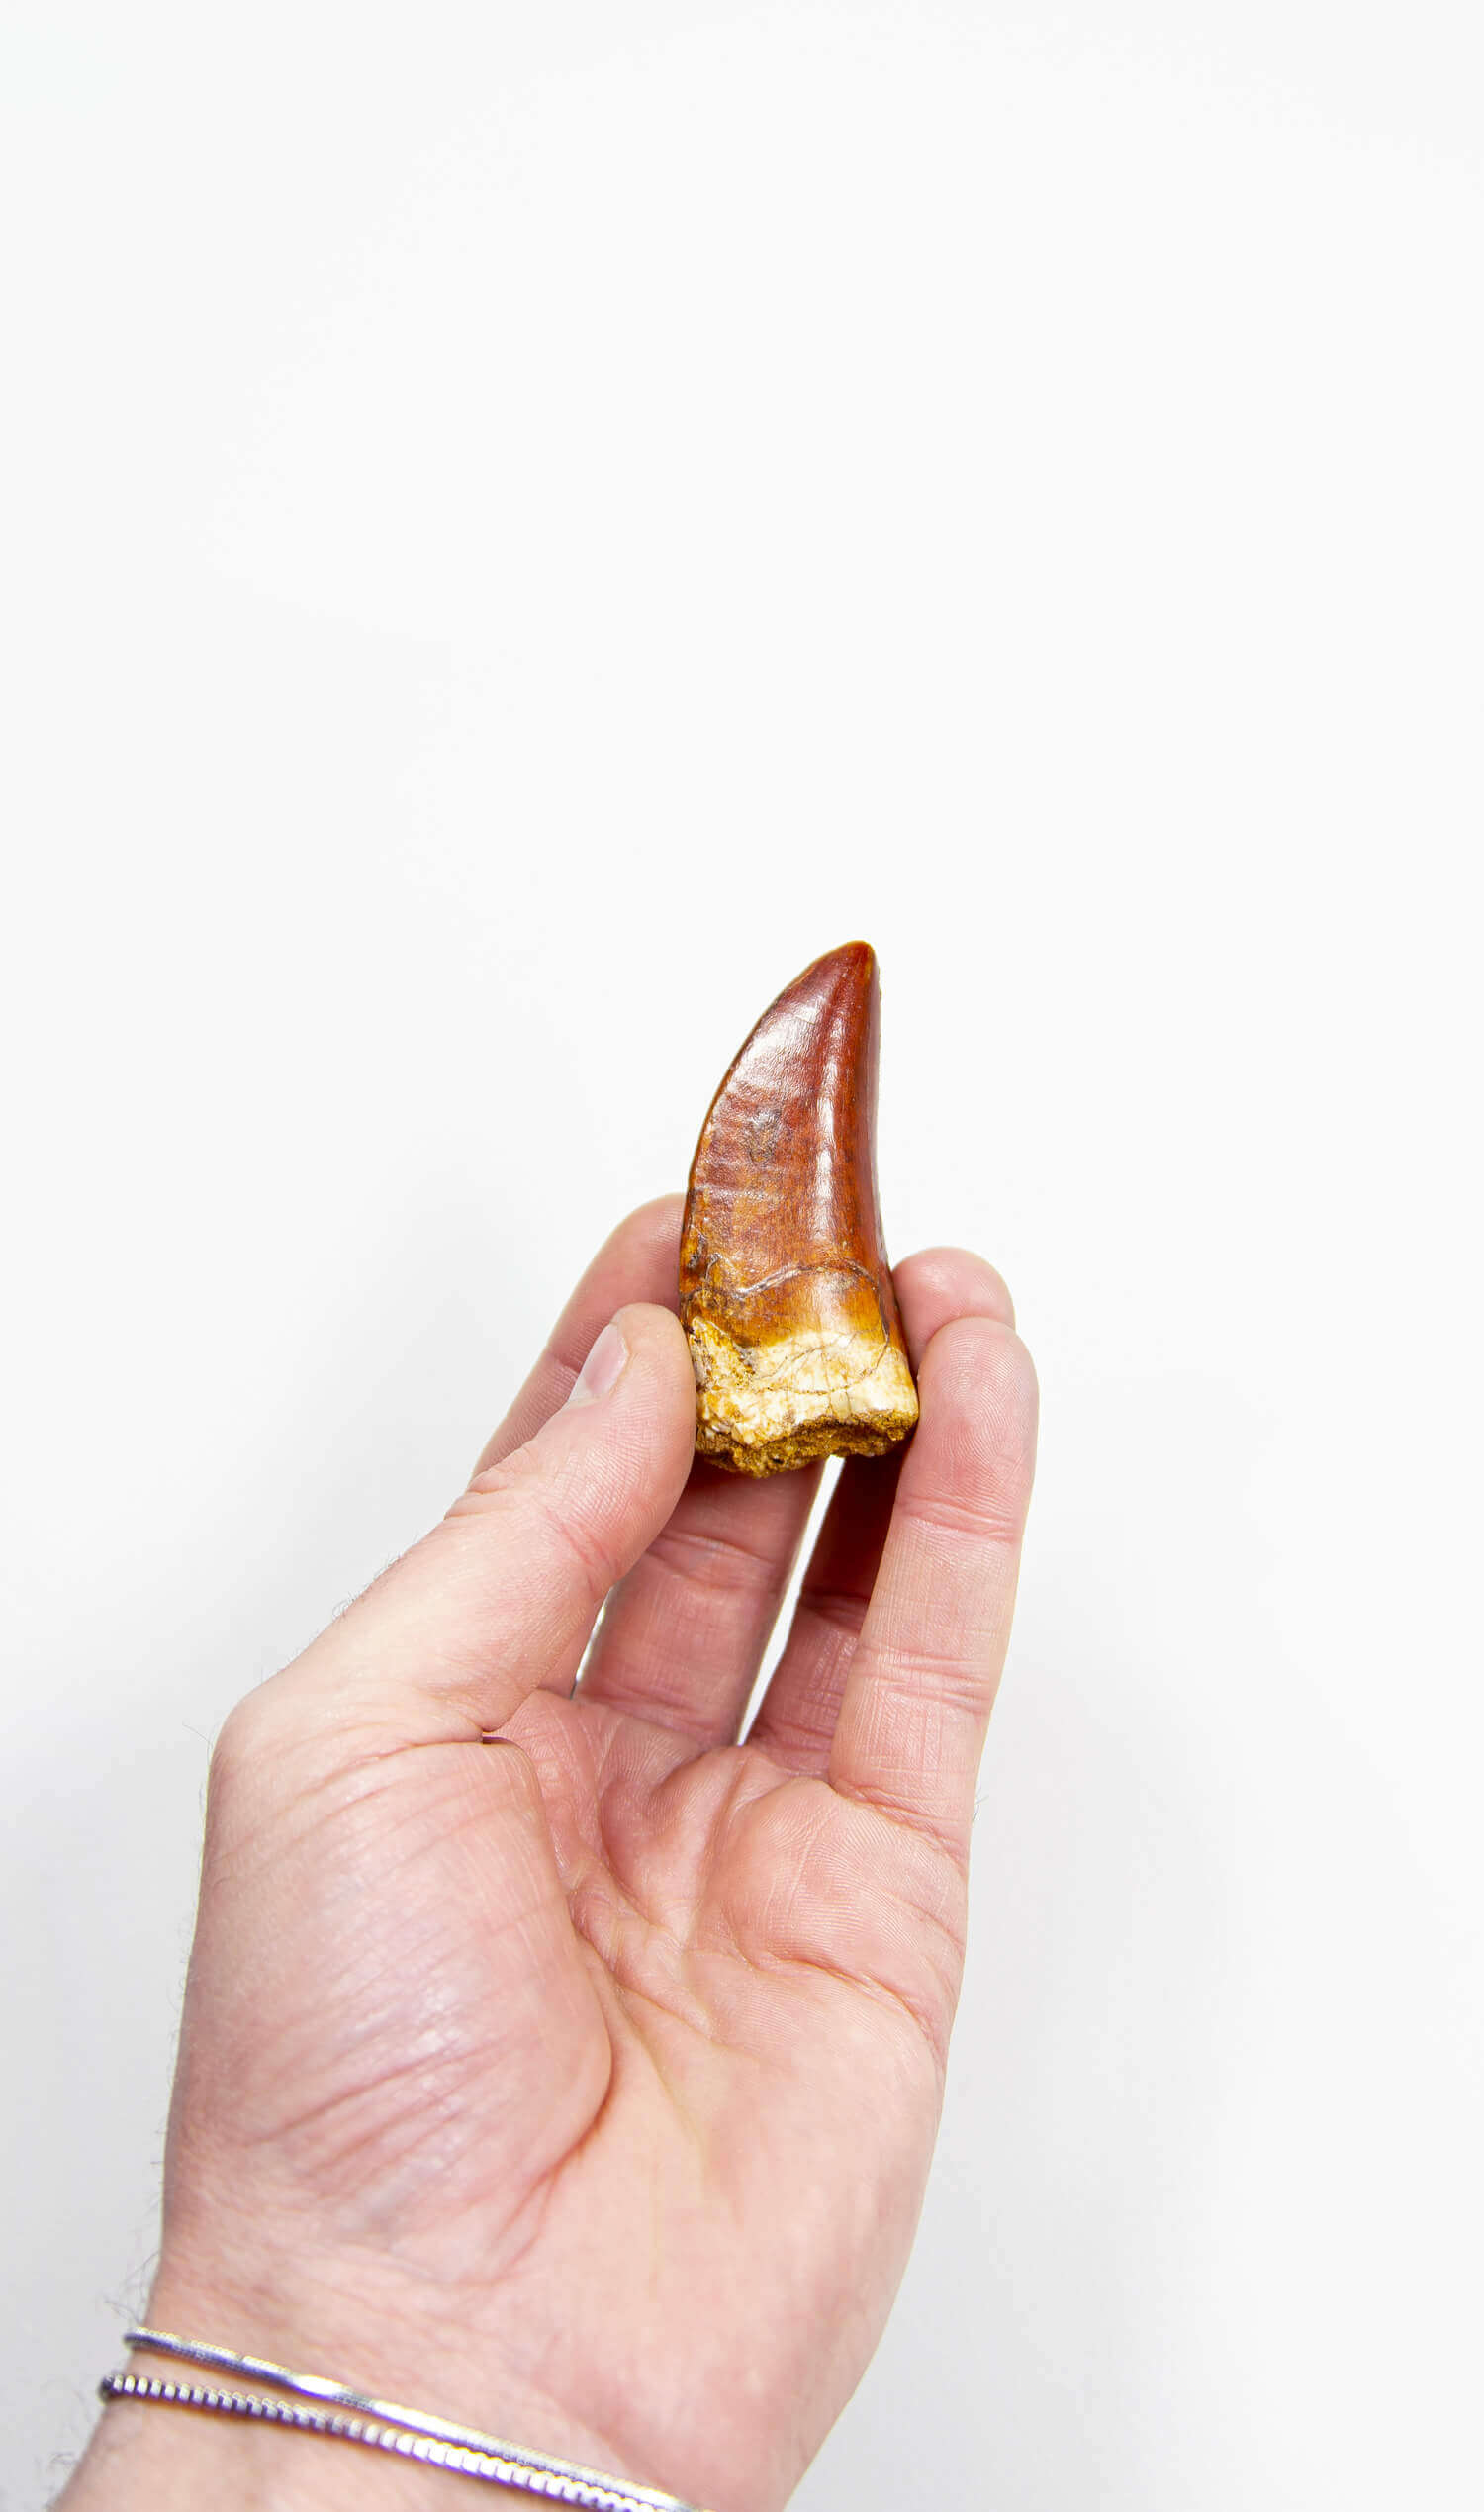 real fossil dinosaur carcharodontosaurus tooth for sale at the uk fossil store 37